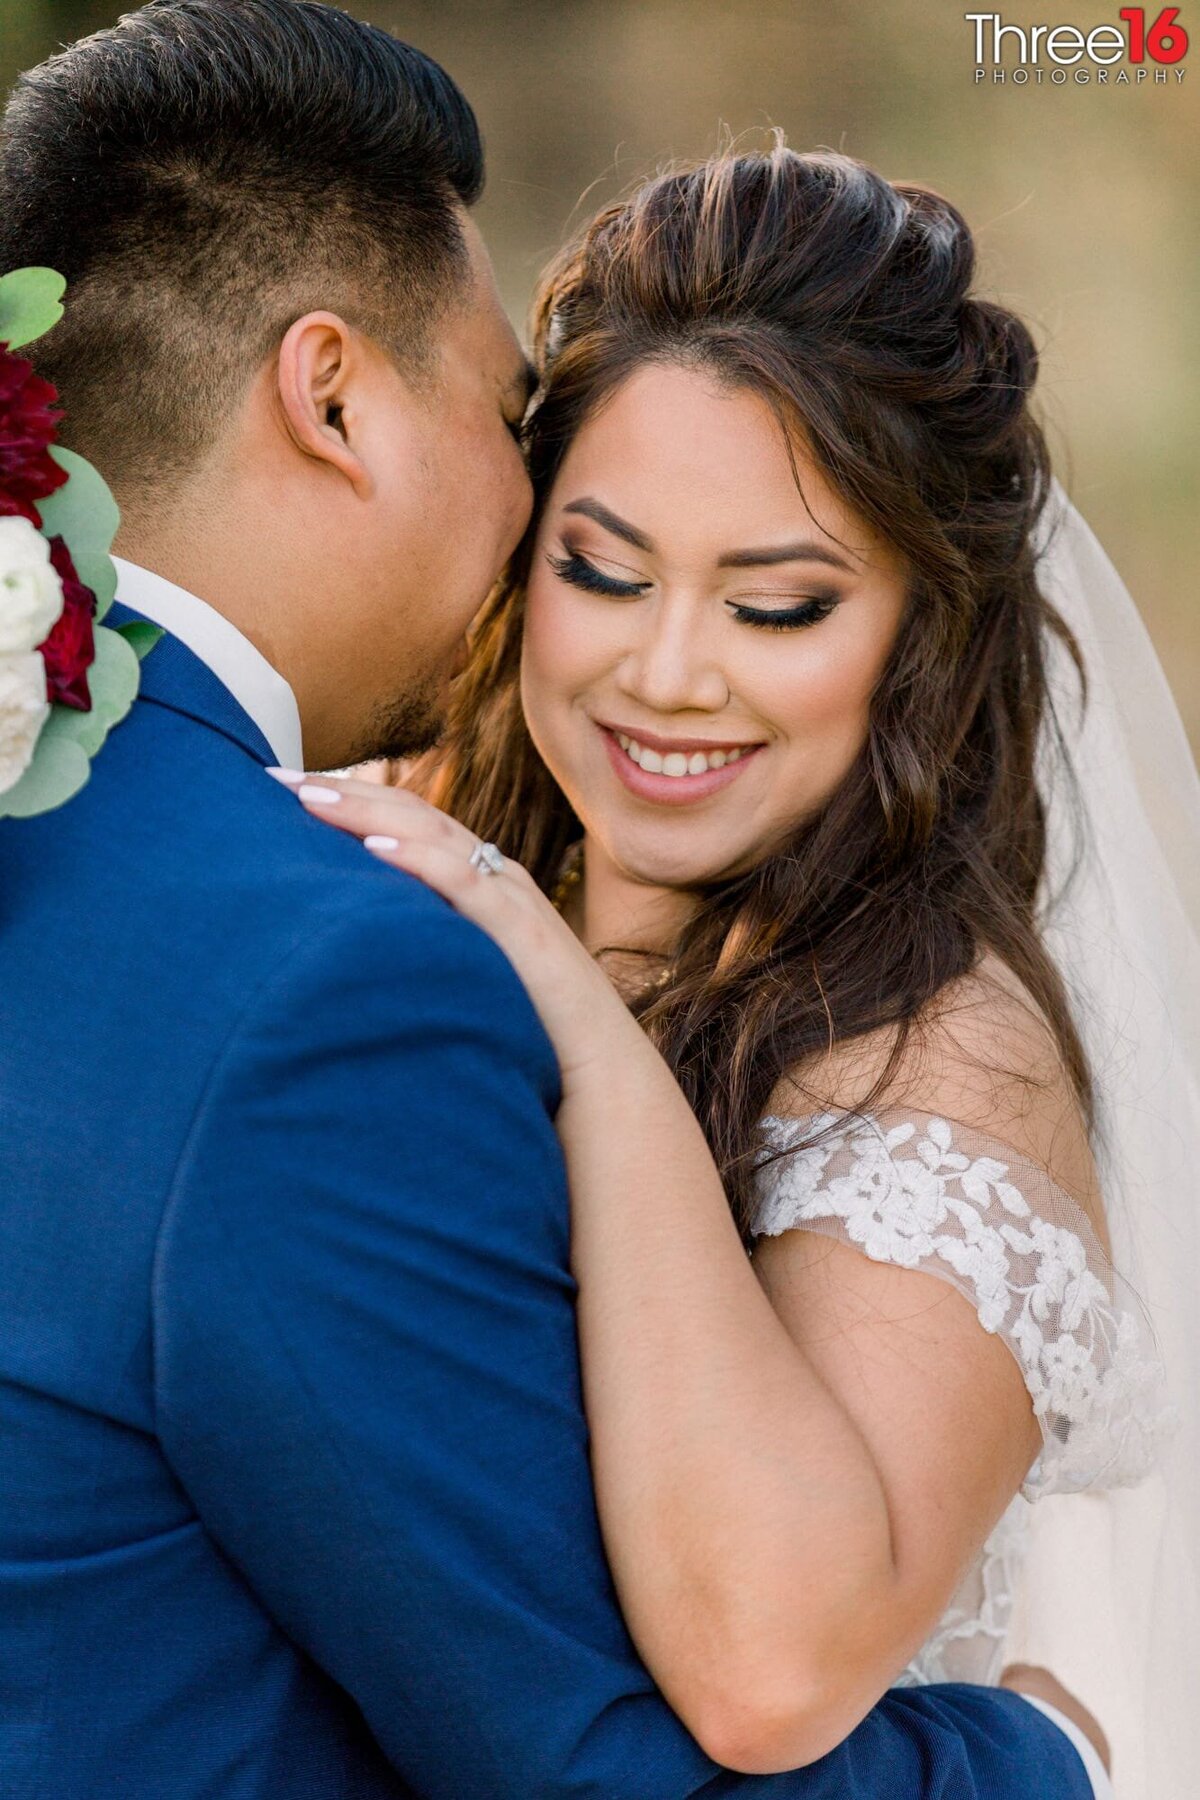 Groom whispers into he Bride's ear leaving a smile on her face